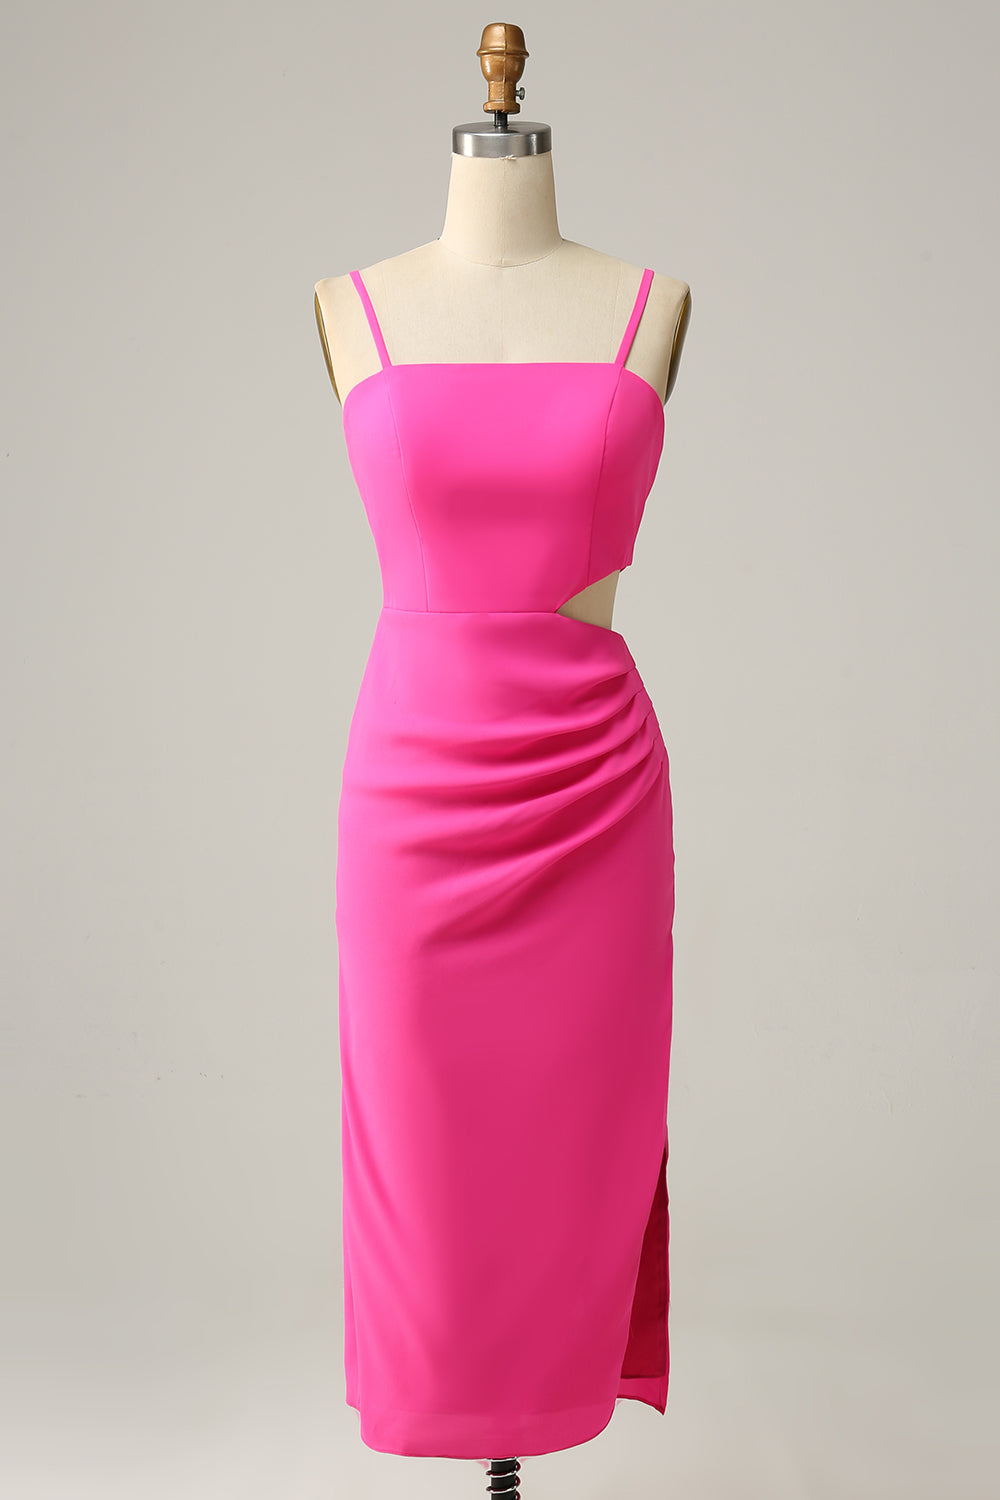 Spaghetti Straps Cut Out Hot Pink Bridesmaid Dress with Ruffles